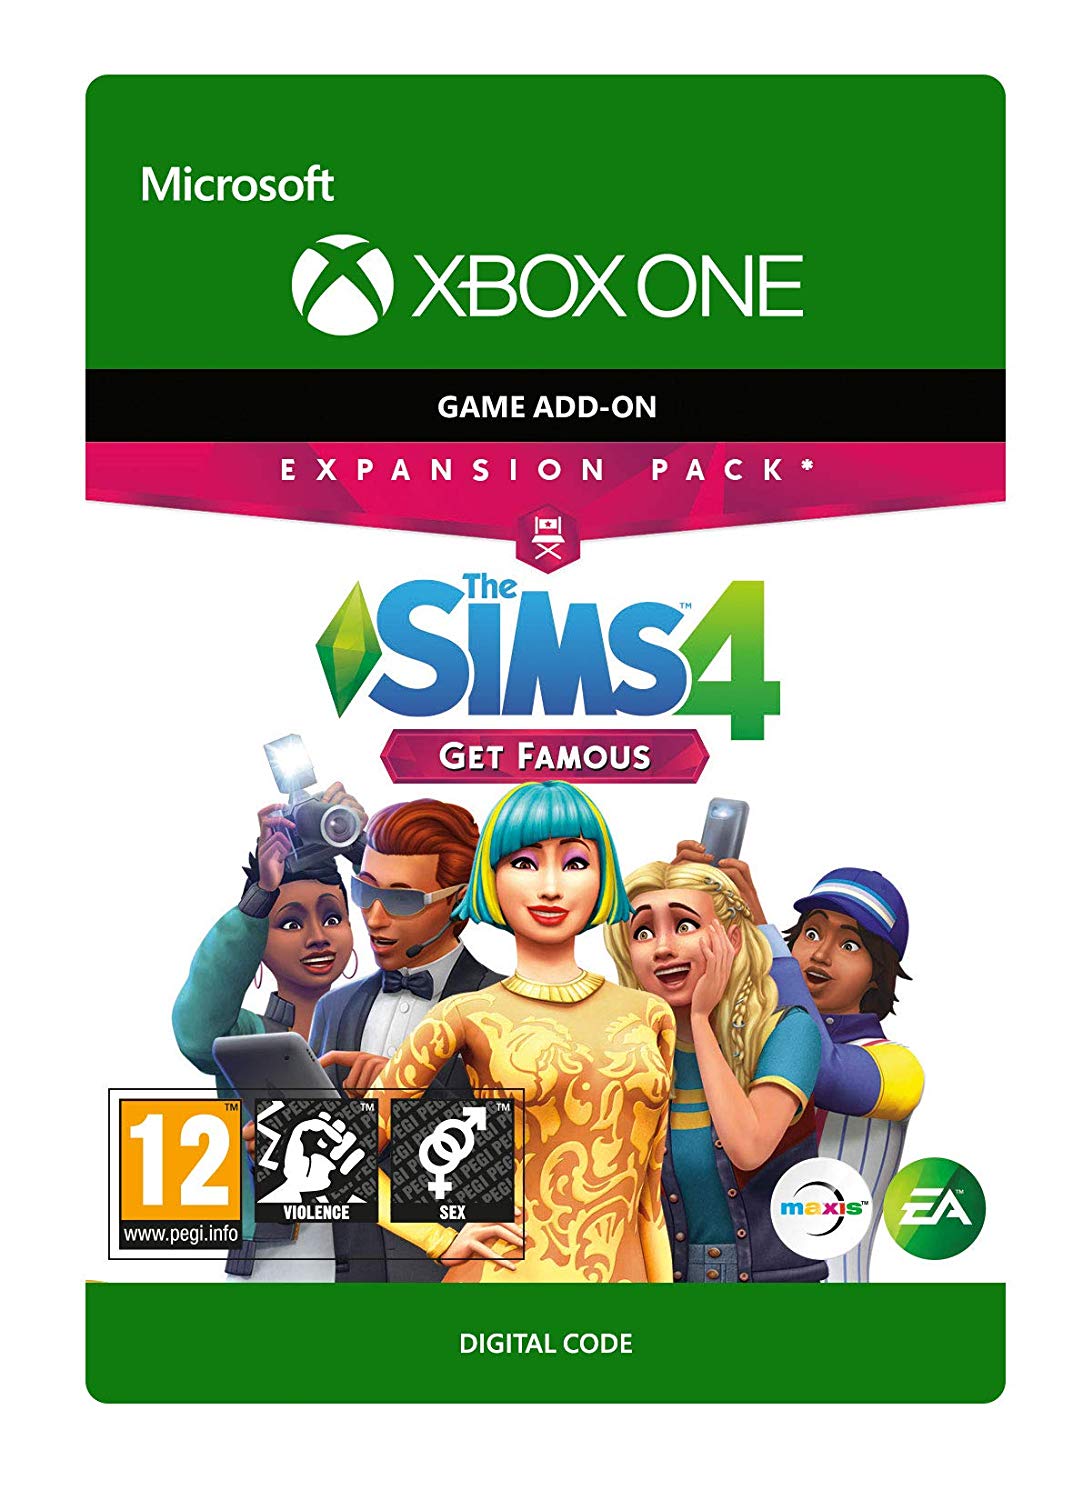 The Sims 4: Get Famous Digital Download Key (Xbox One)